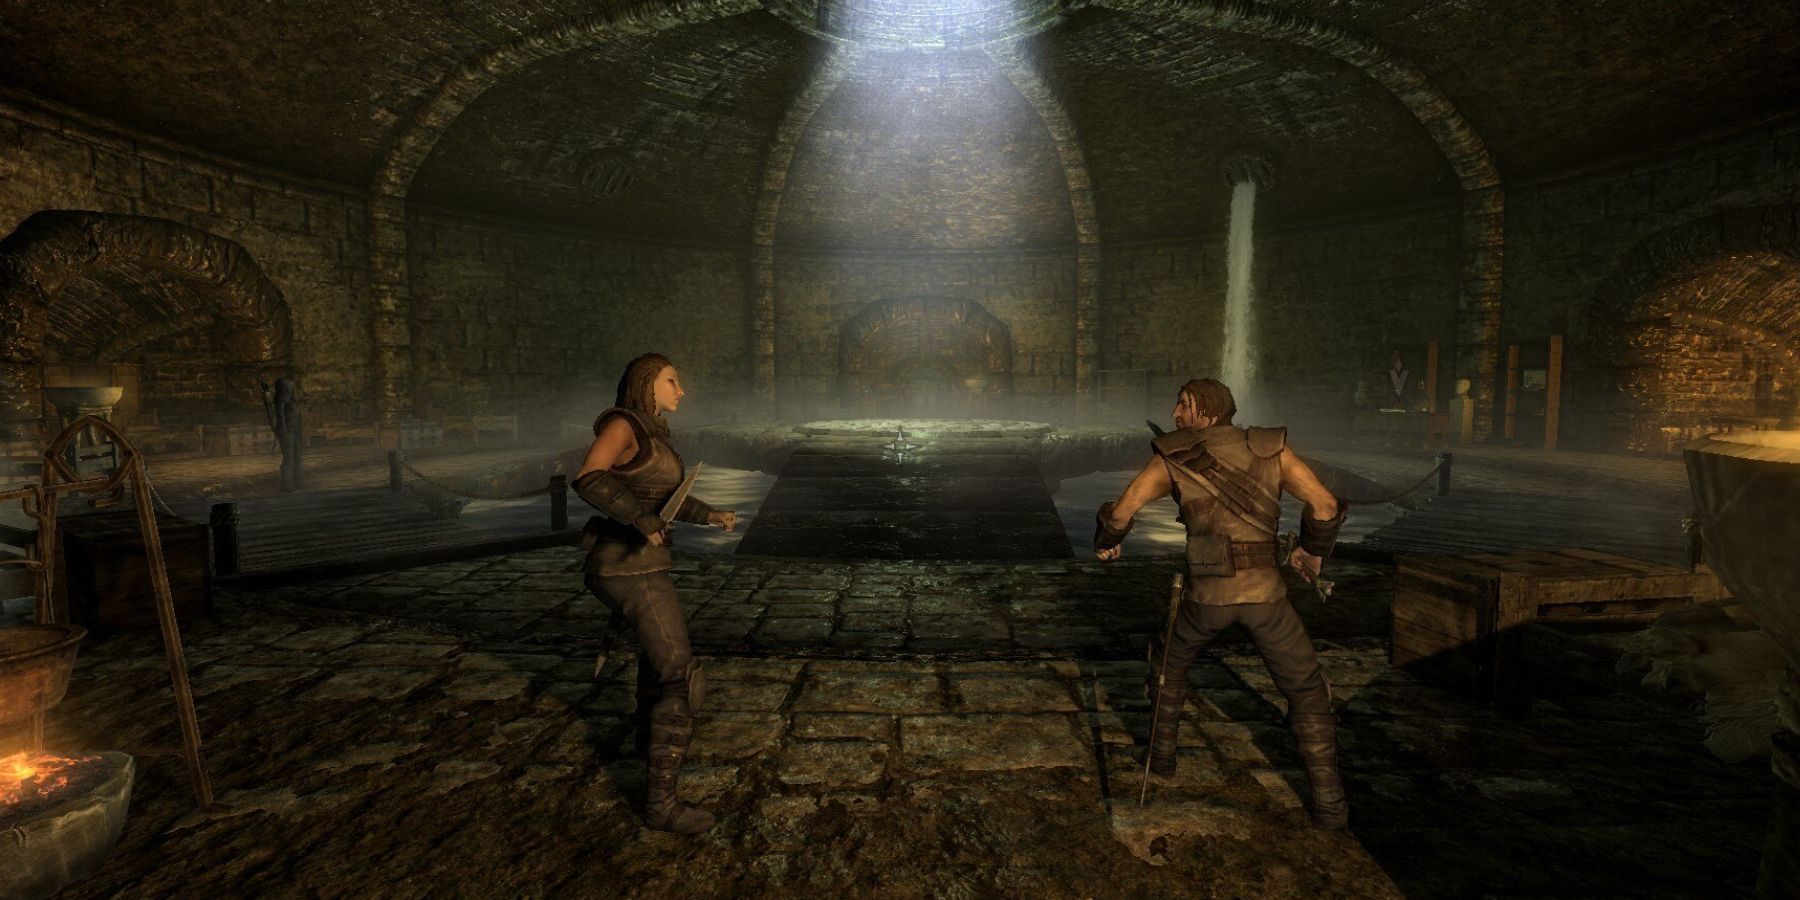 Skyrim: two characters about to fight